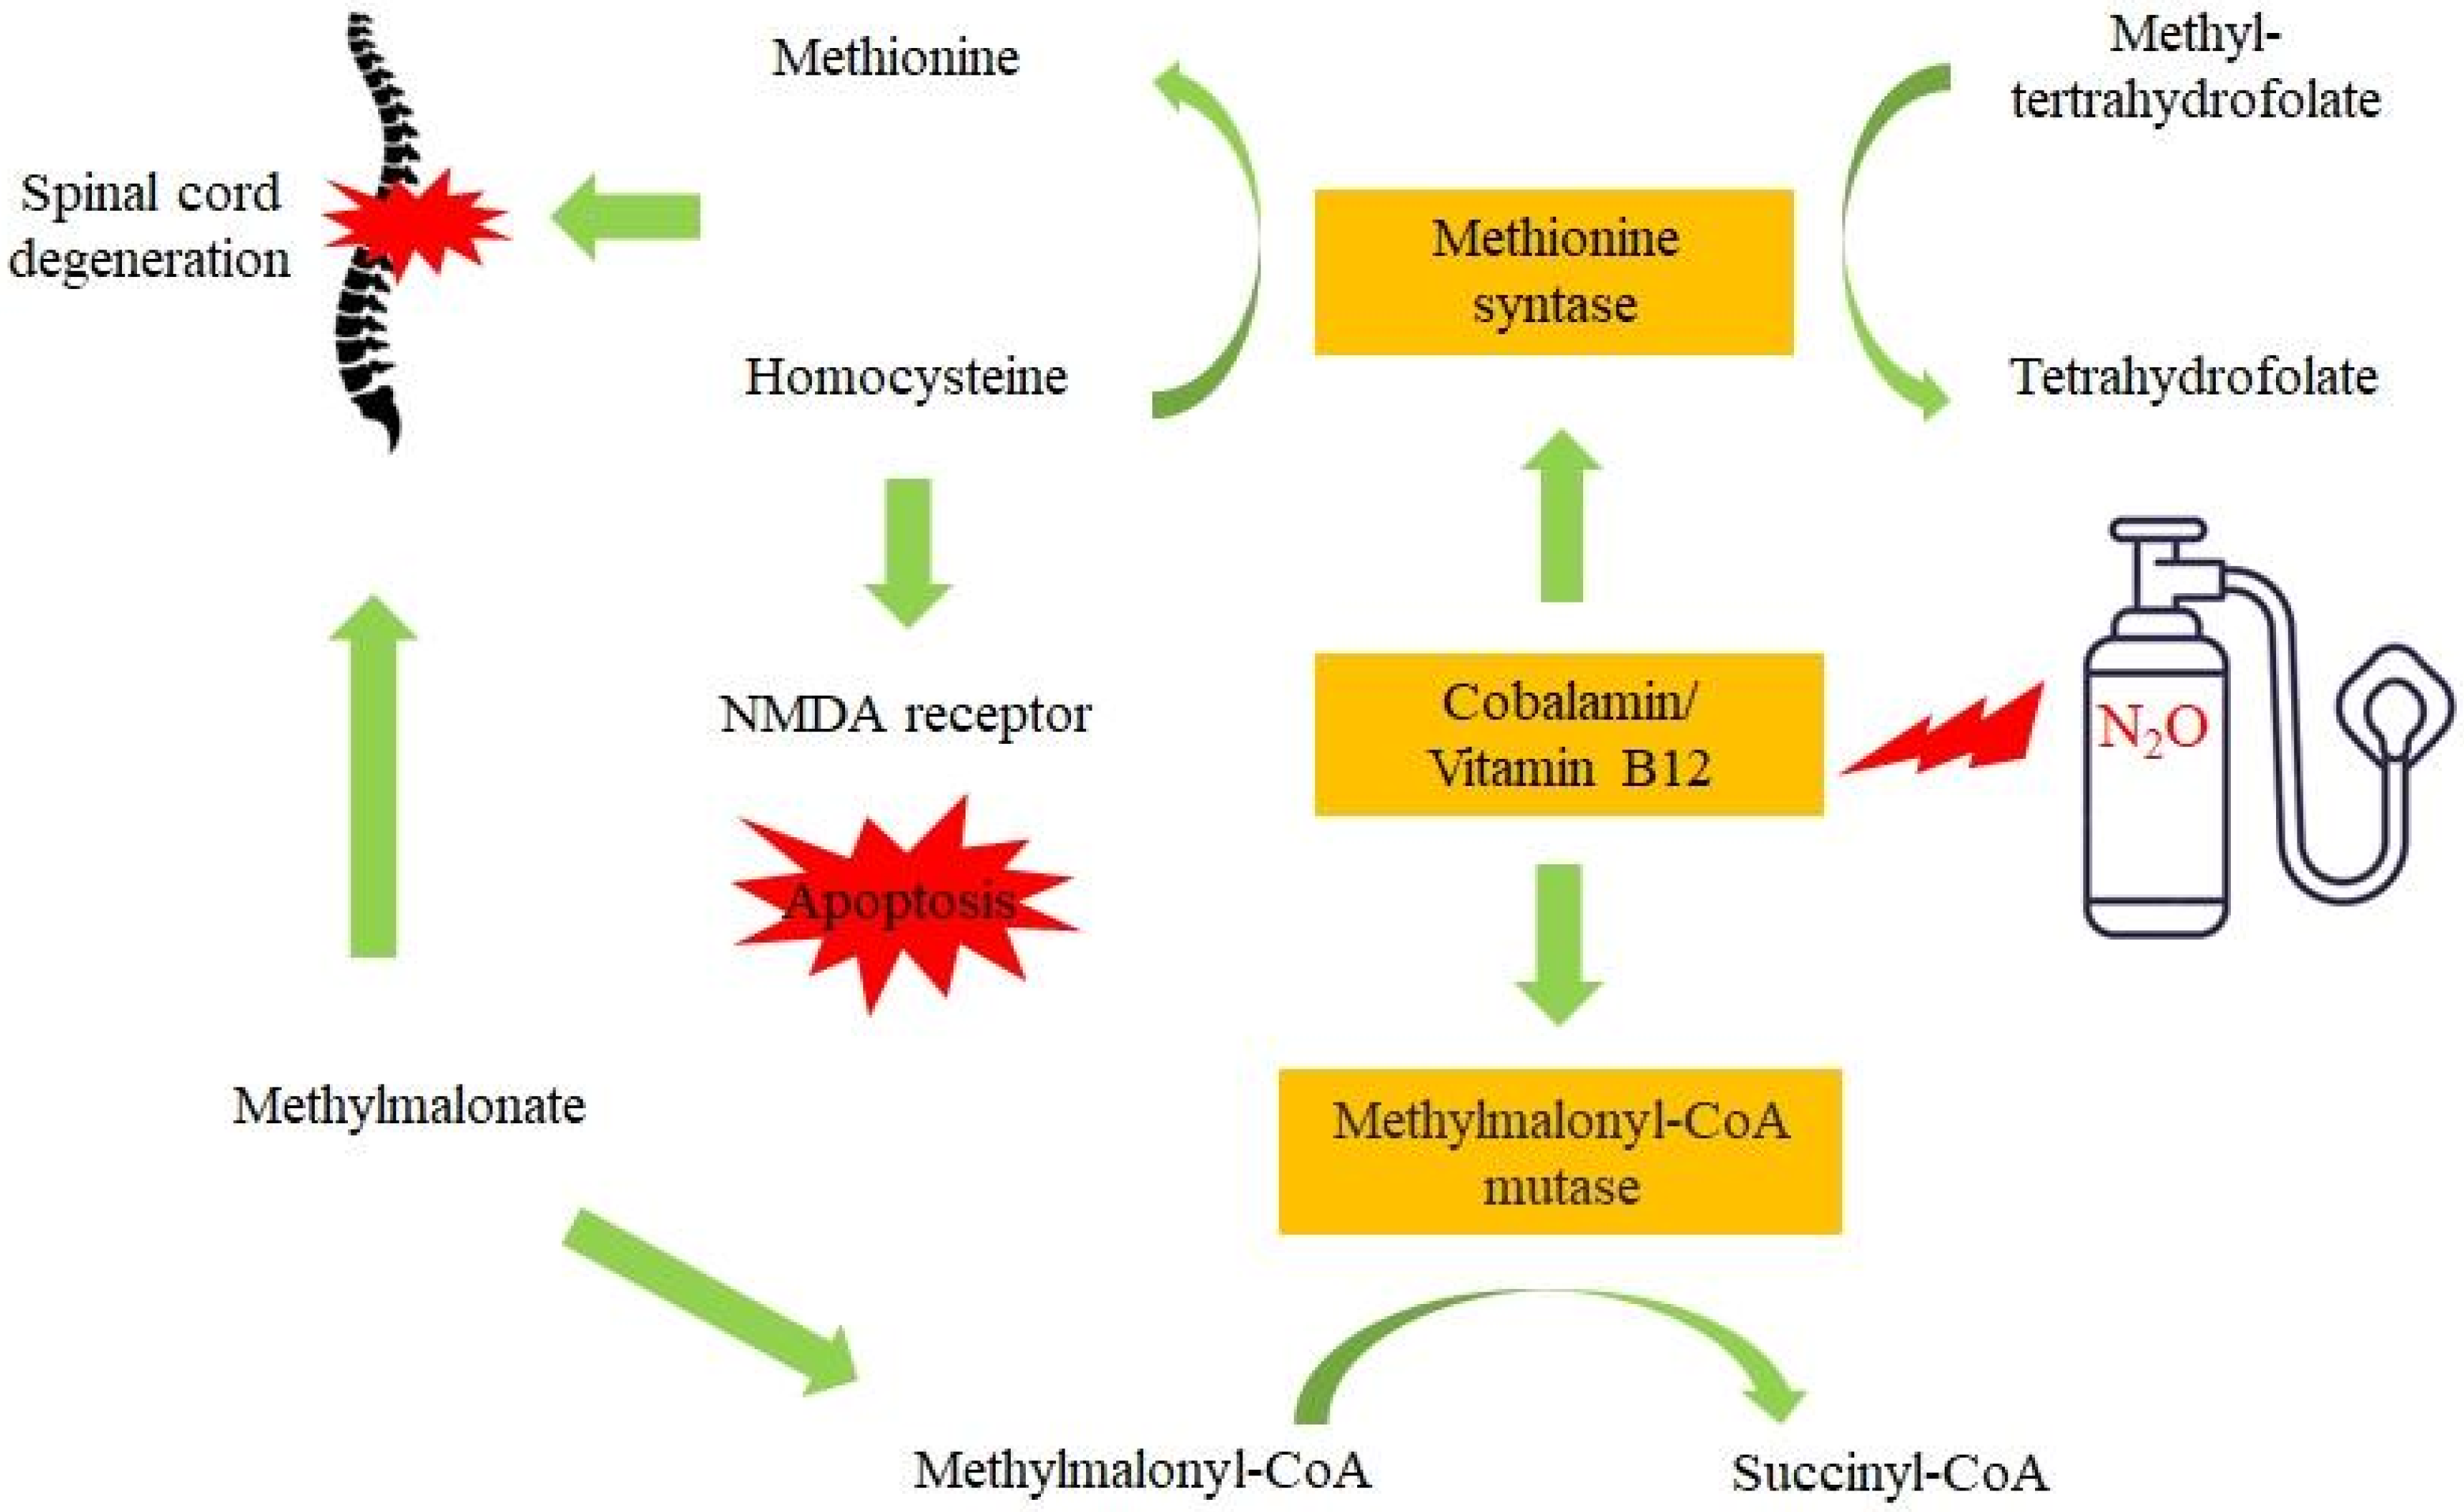 IJMS | Free Full-Text | Mechanisms Involved in the Neurotoxicity and Abuse  Liability of Nitrous Oxide: A Narrative Review